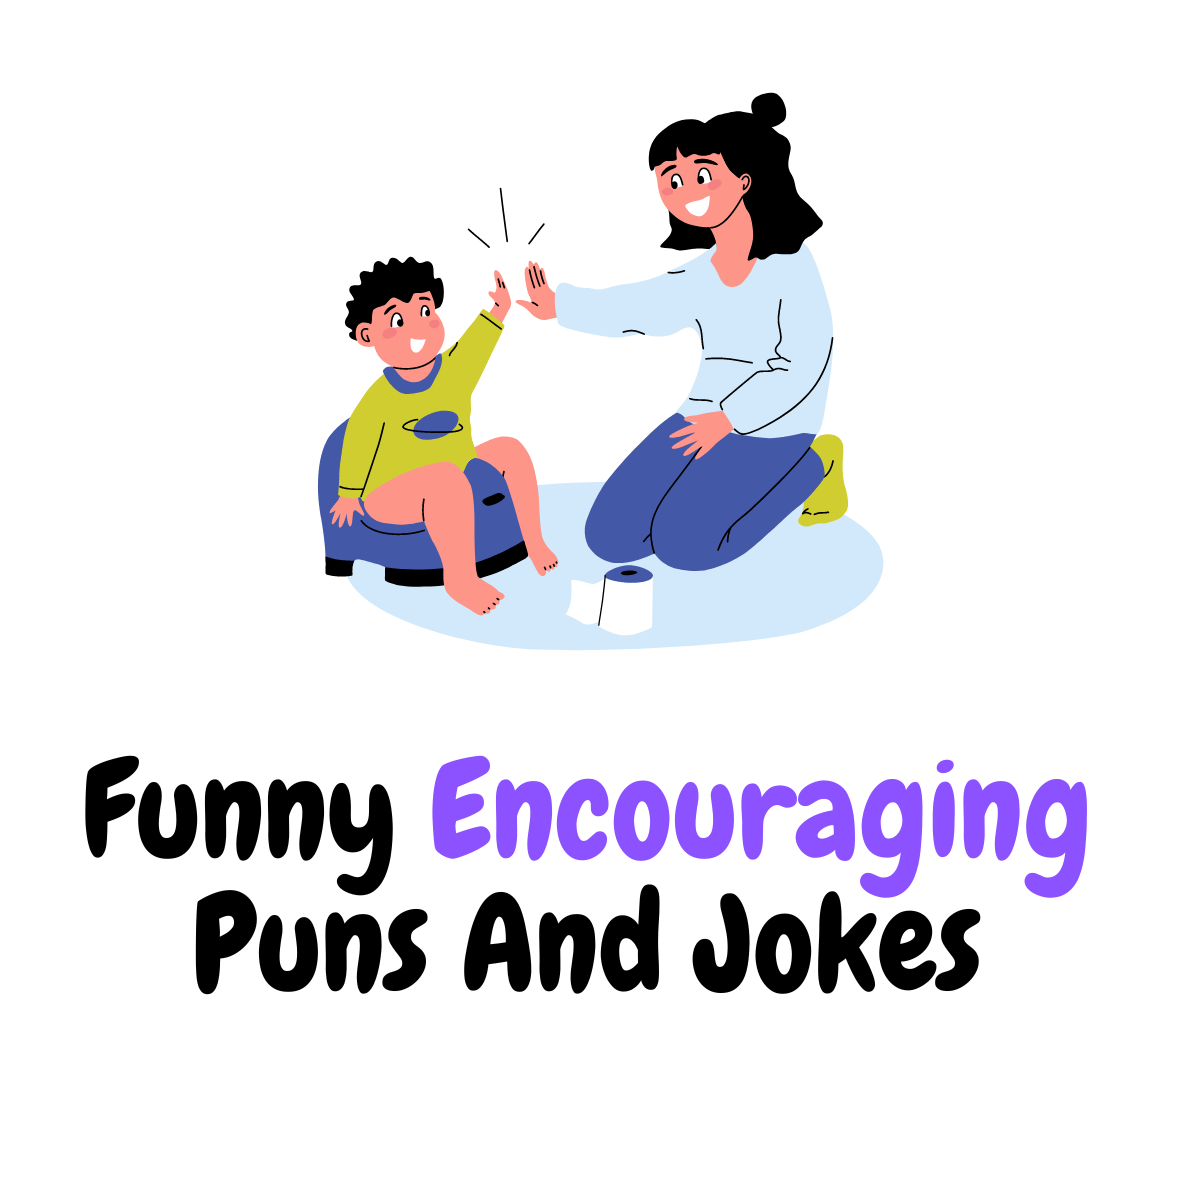 Funny Encouraging Puns And Jokes